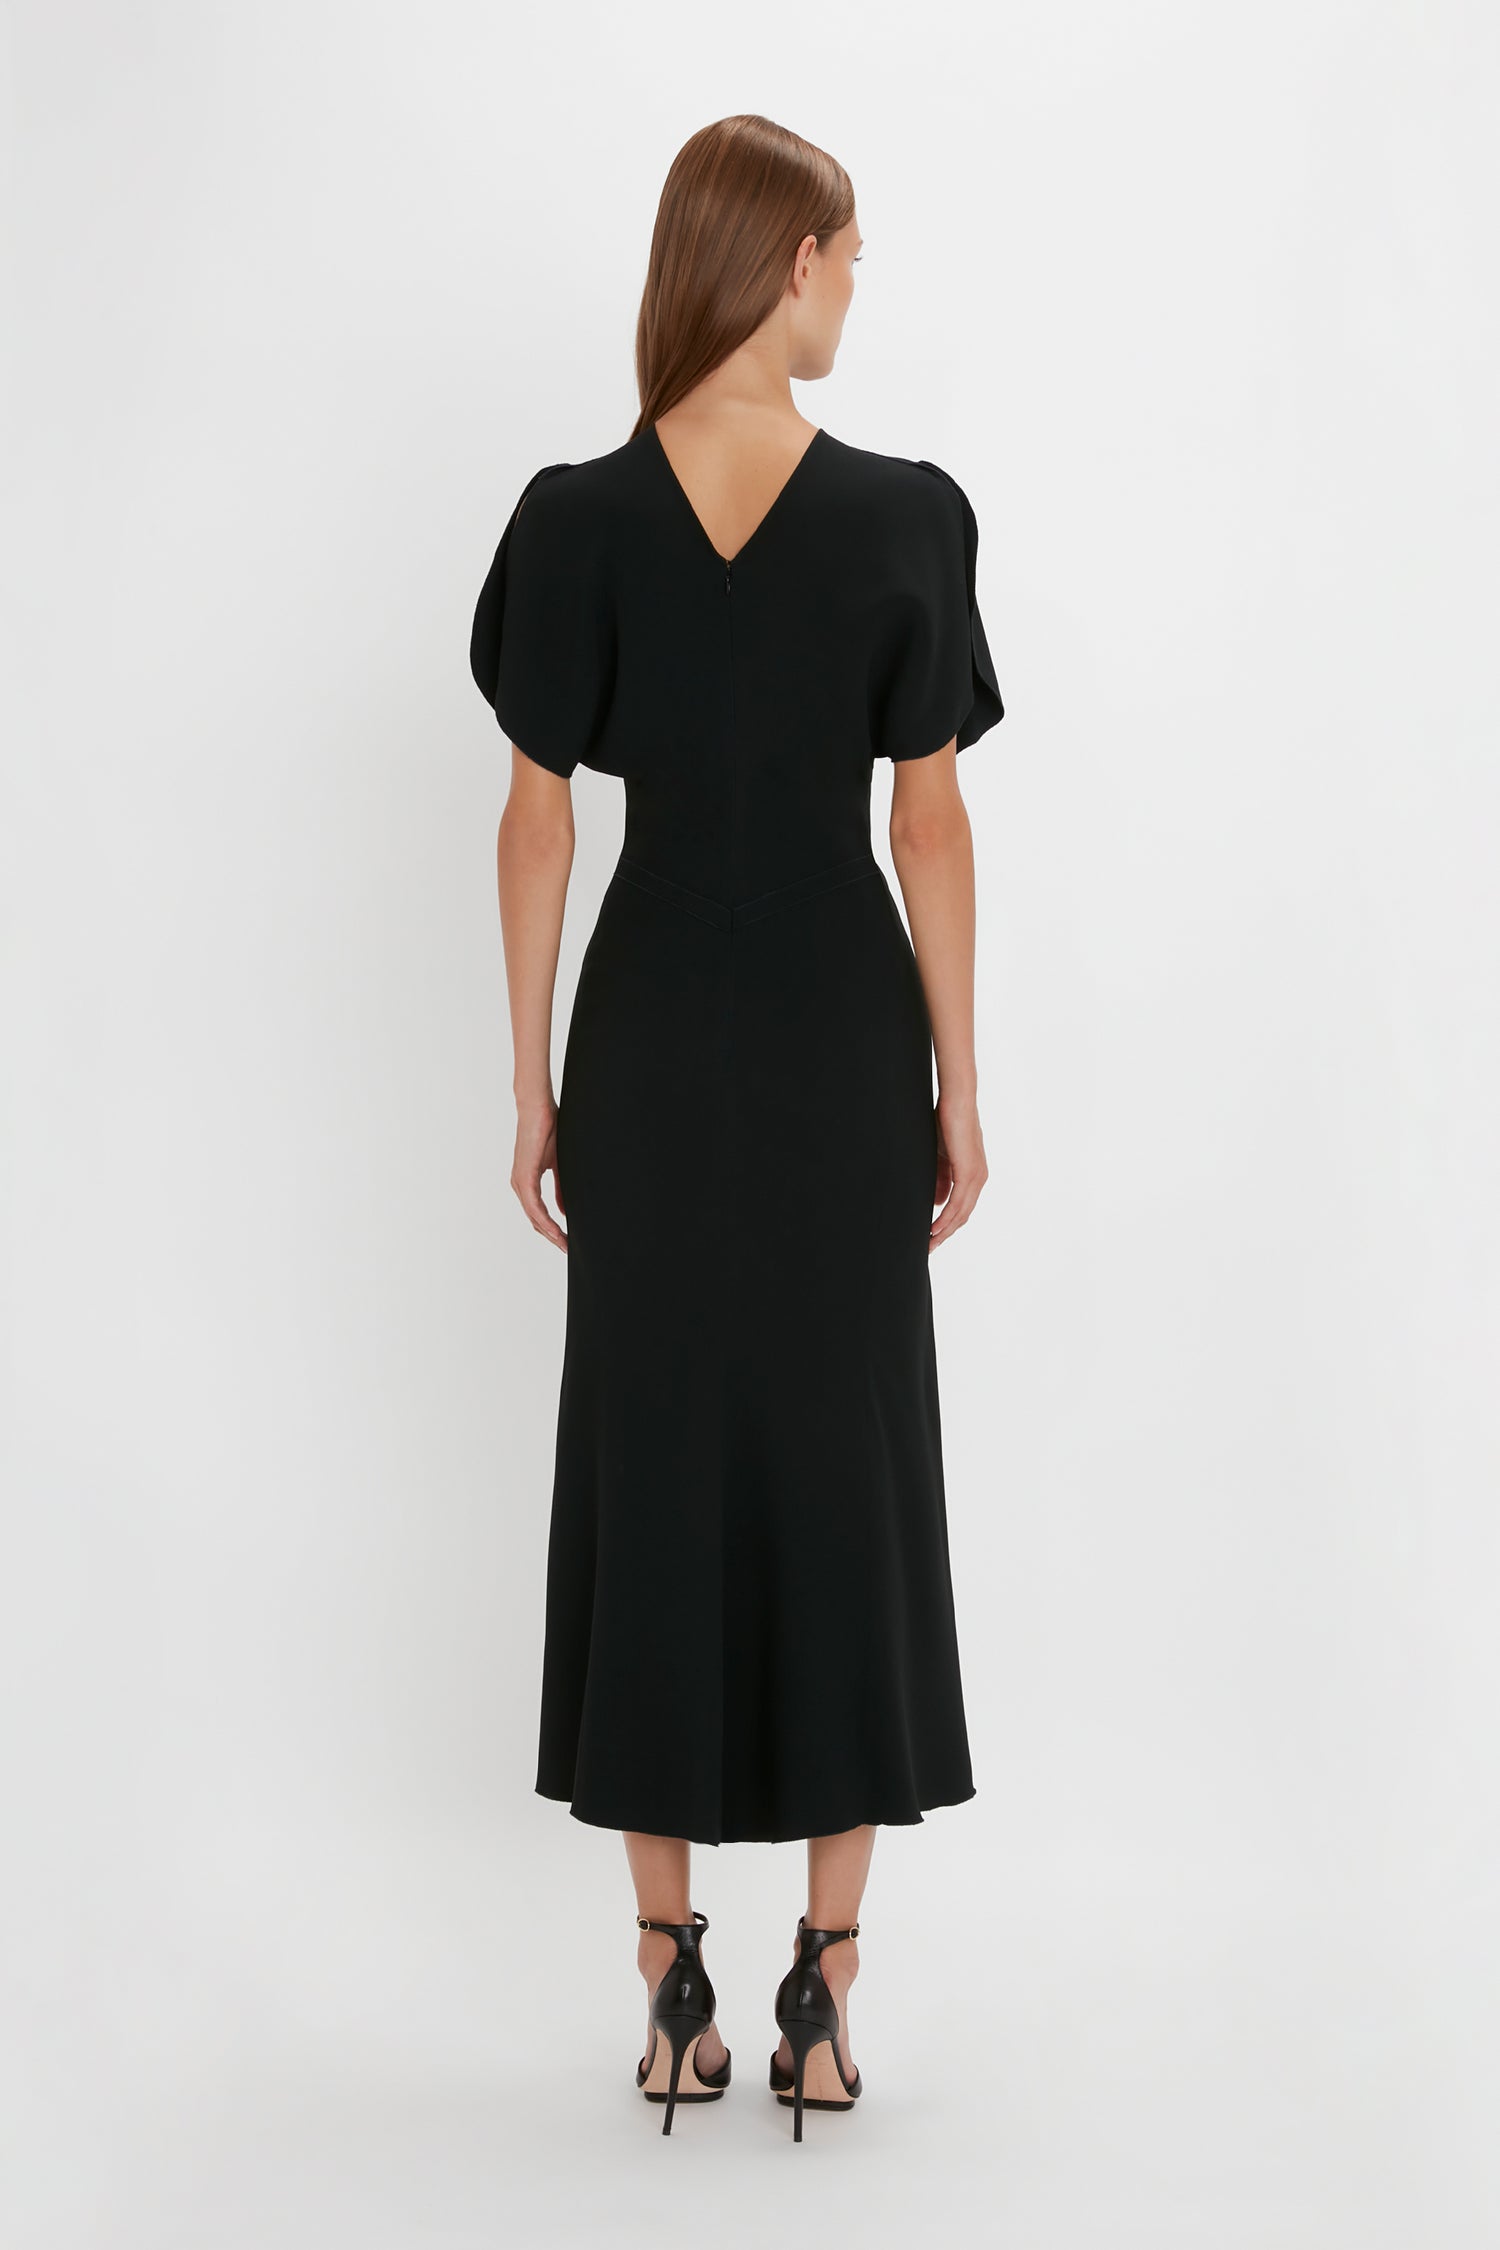 A woman seen from behind, wearing a black, mid-calf length Gathered Waist Midi Dress in Black with short sleeves and standing against a white background.